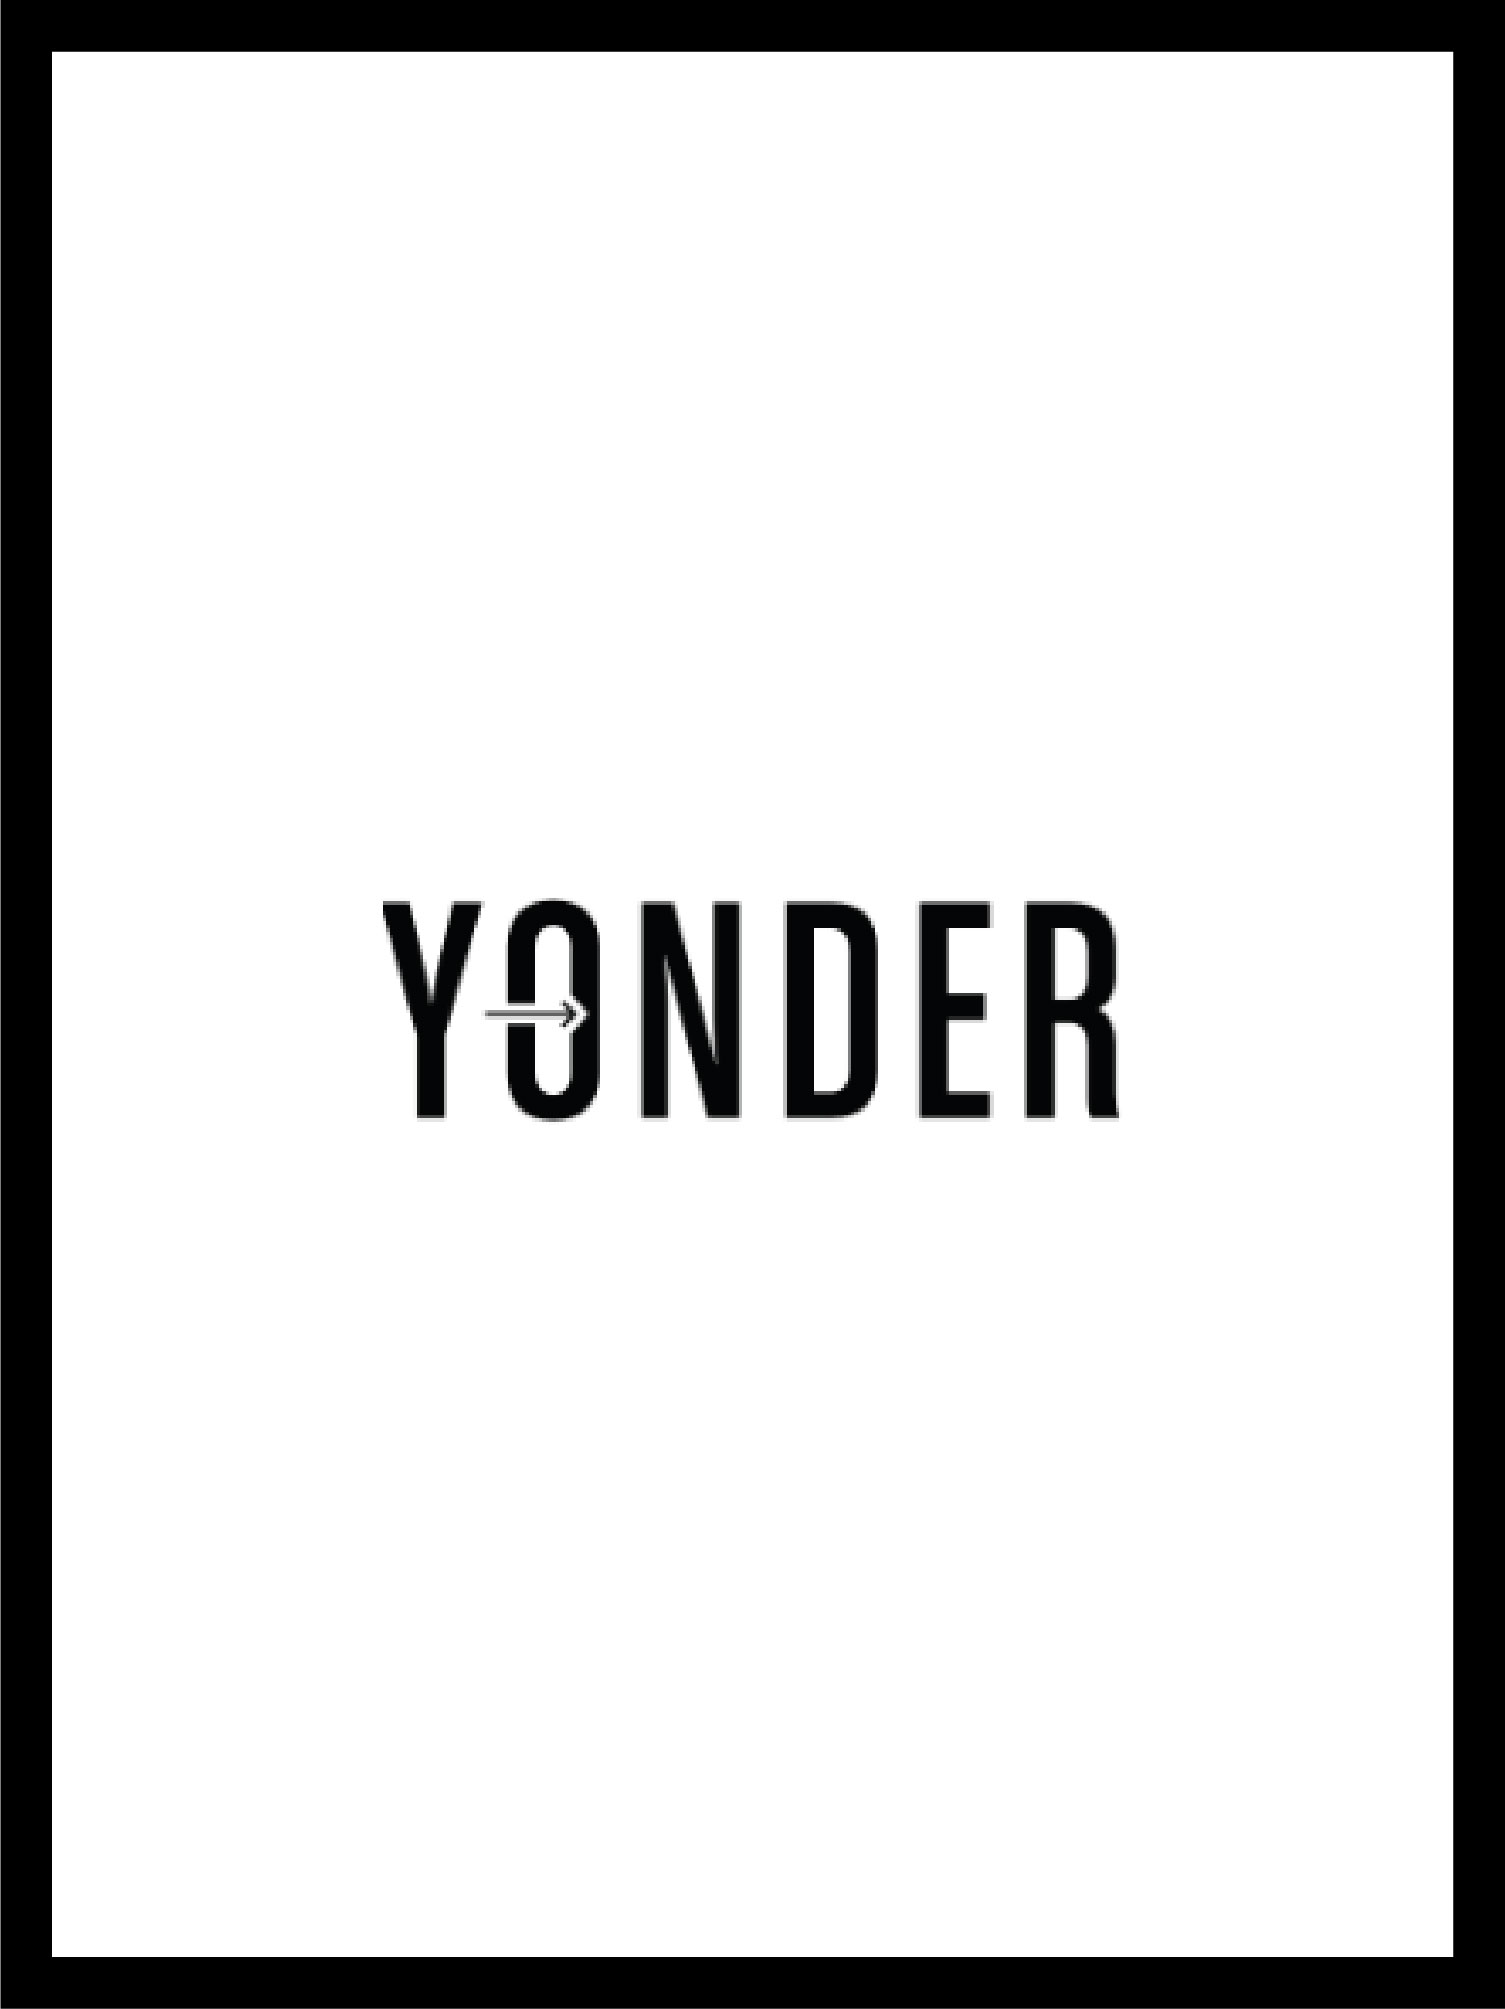 logo and cover of the magazine yonder